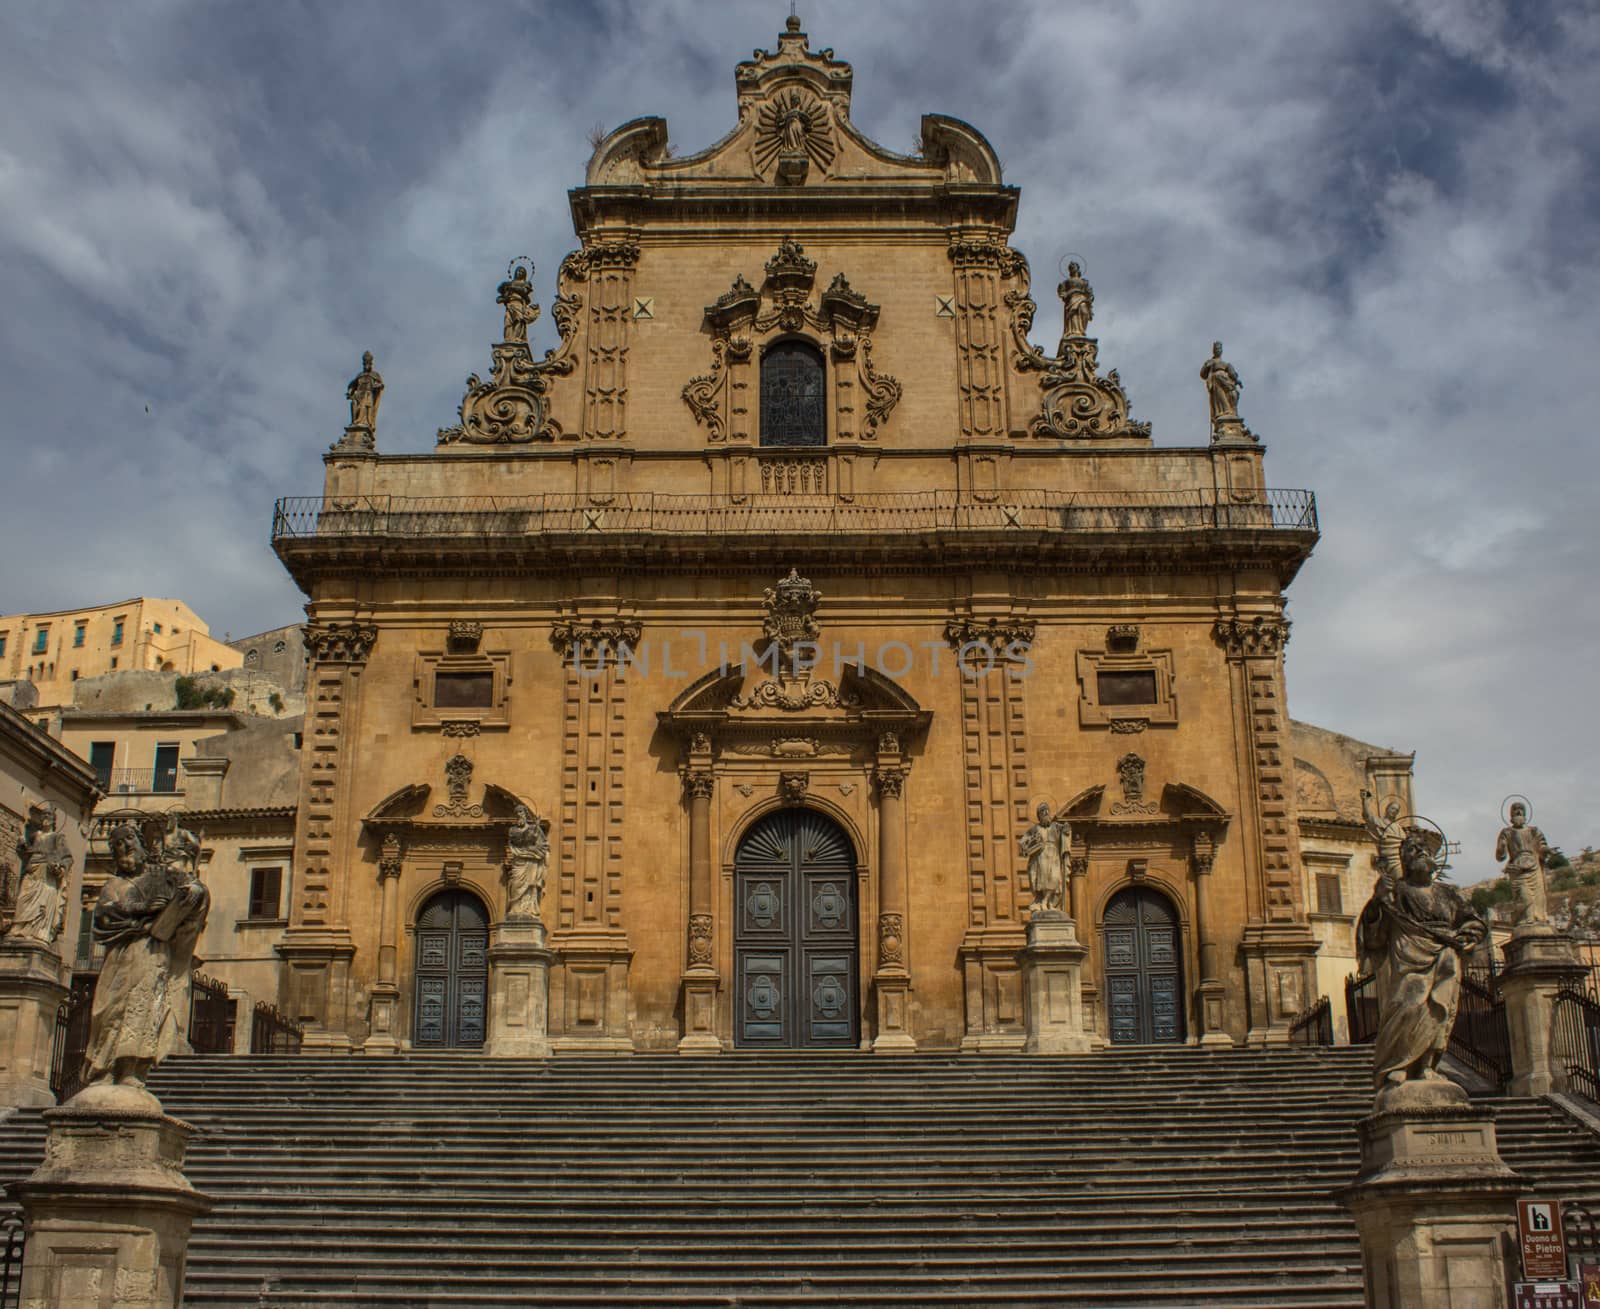 St. Peter's Church of Modica in Sicily famous for its Baroque architecture